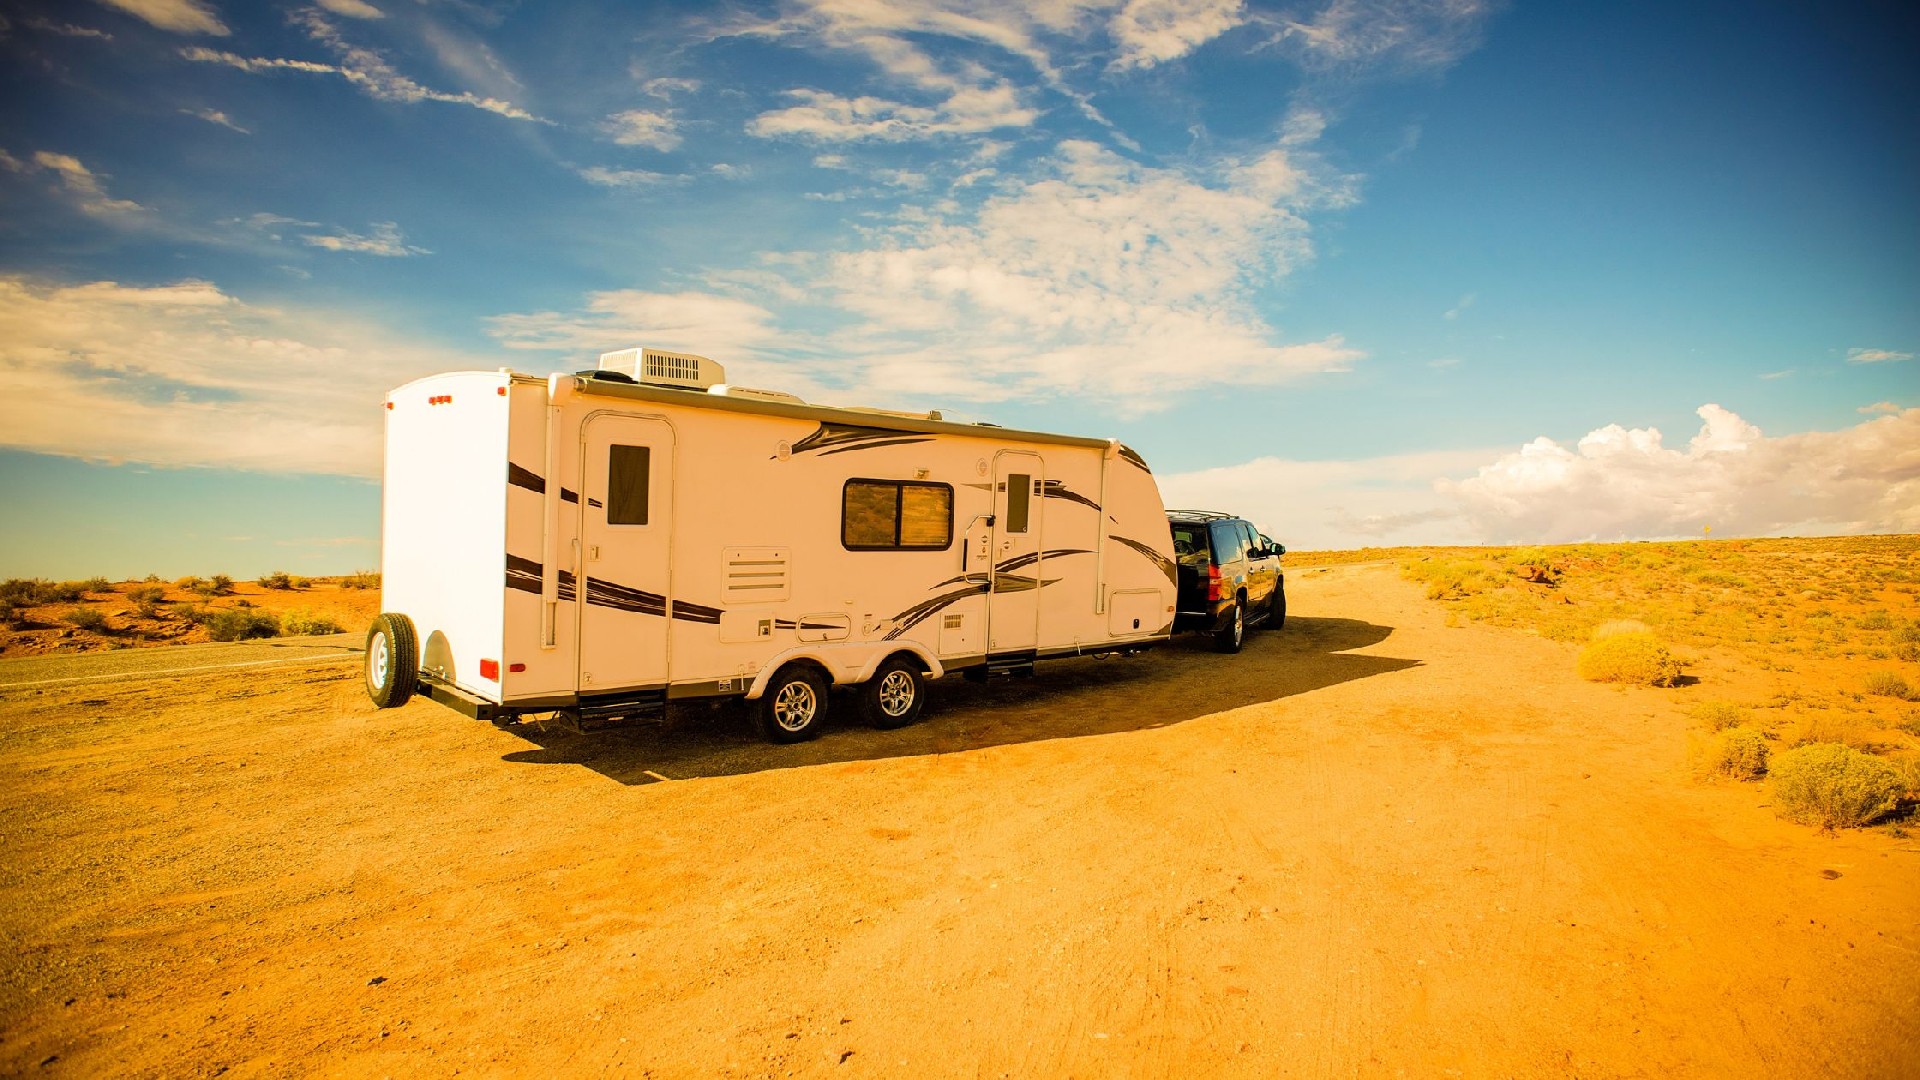 How long do travel trailers last?